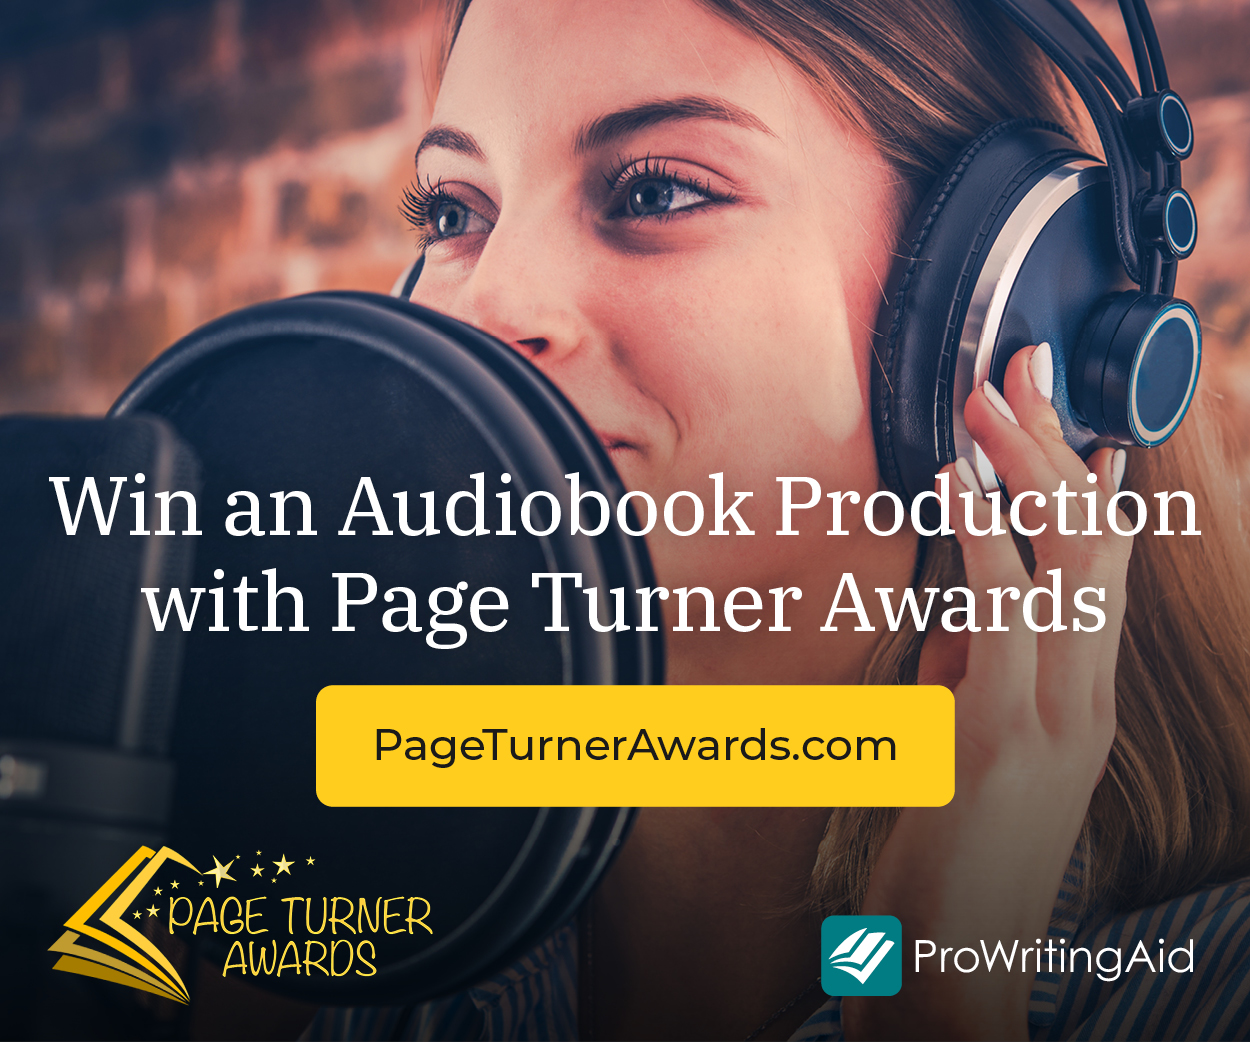 Win audiobook production